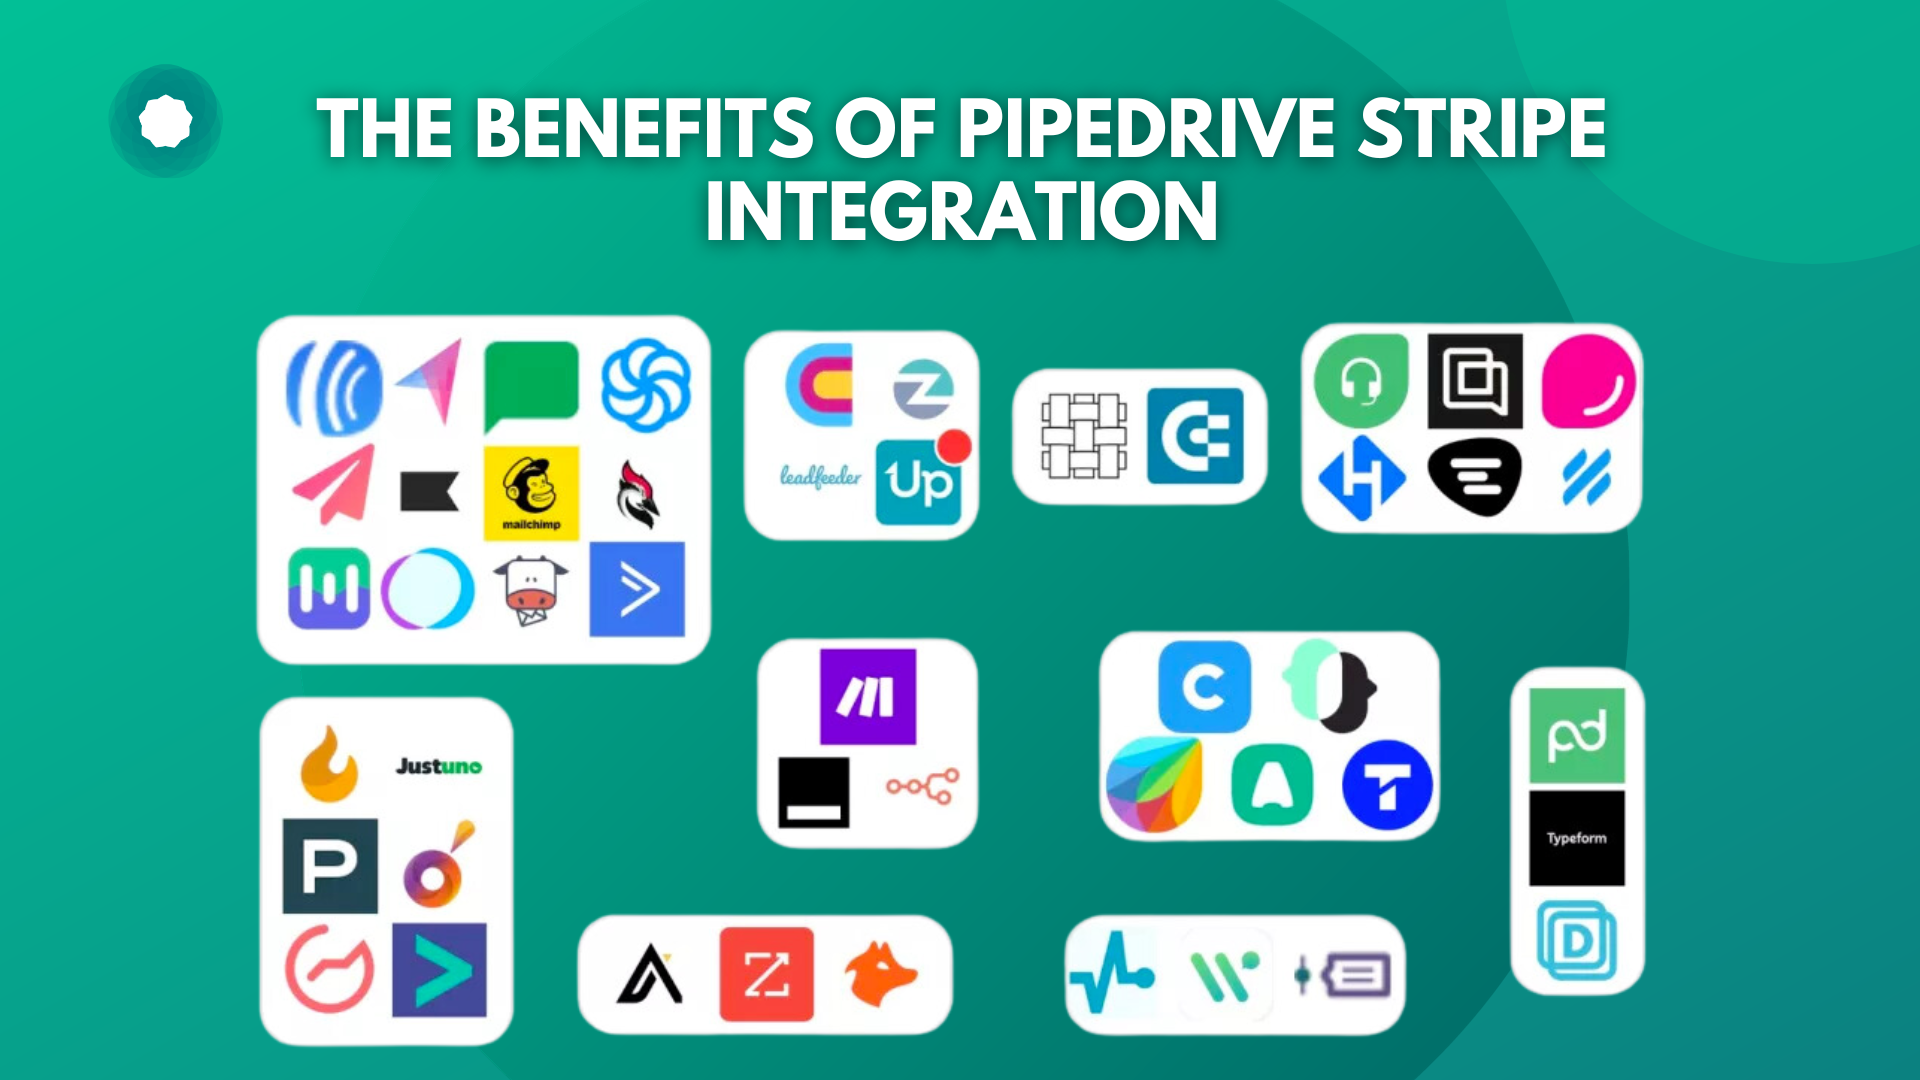 Optimize Sales with Pipedrive Stripe Integration